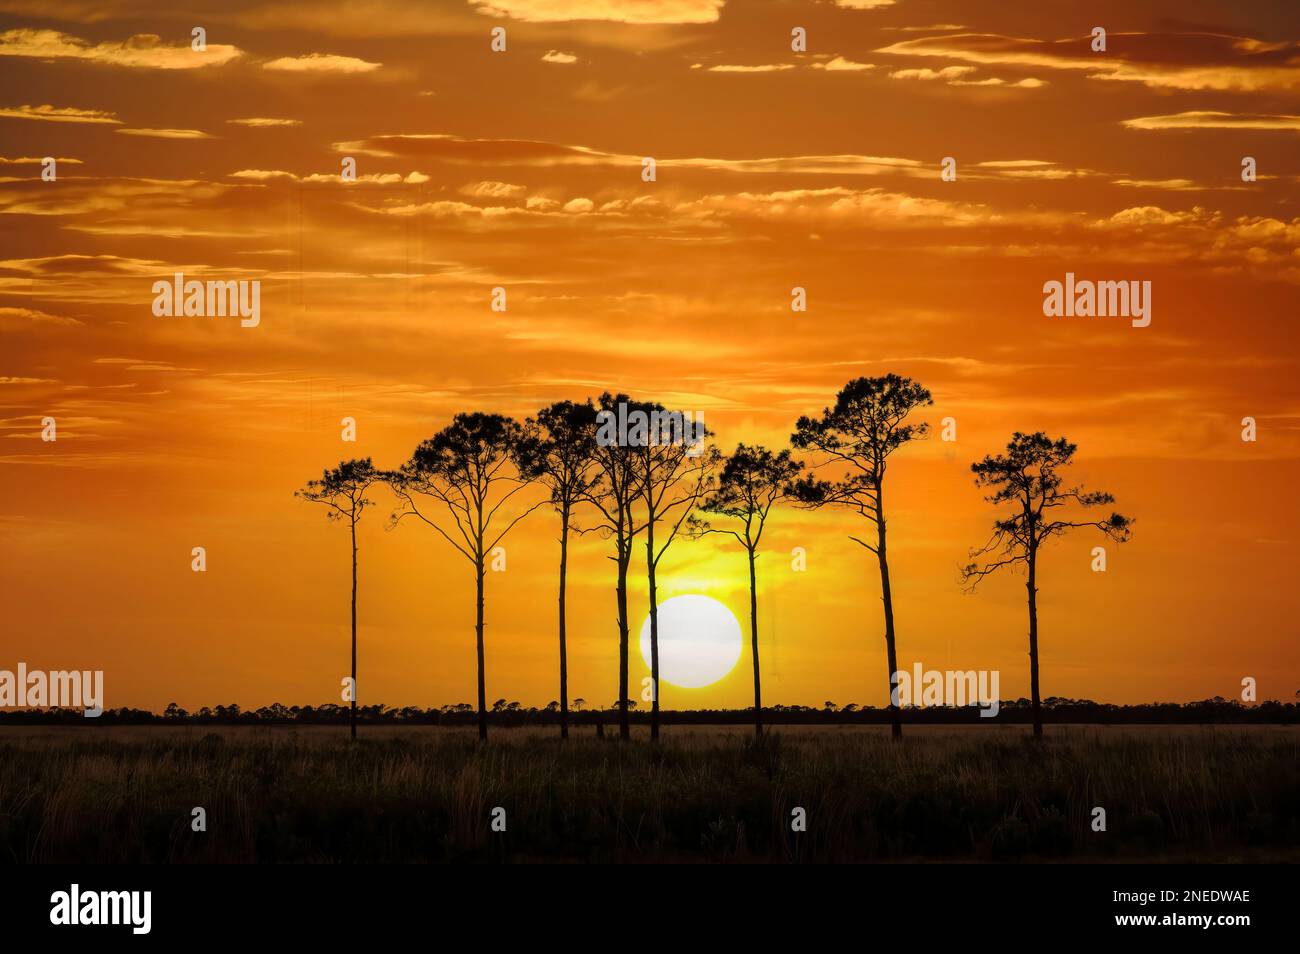 Pine trees silhouetted aganist an ornage  sunset sky in Southwestern Florida USA Stock Photo